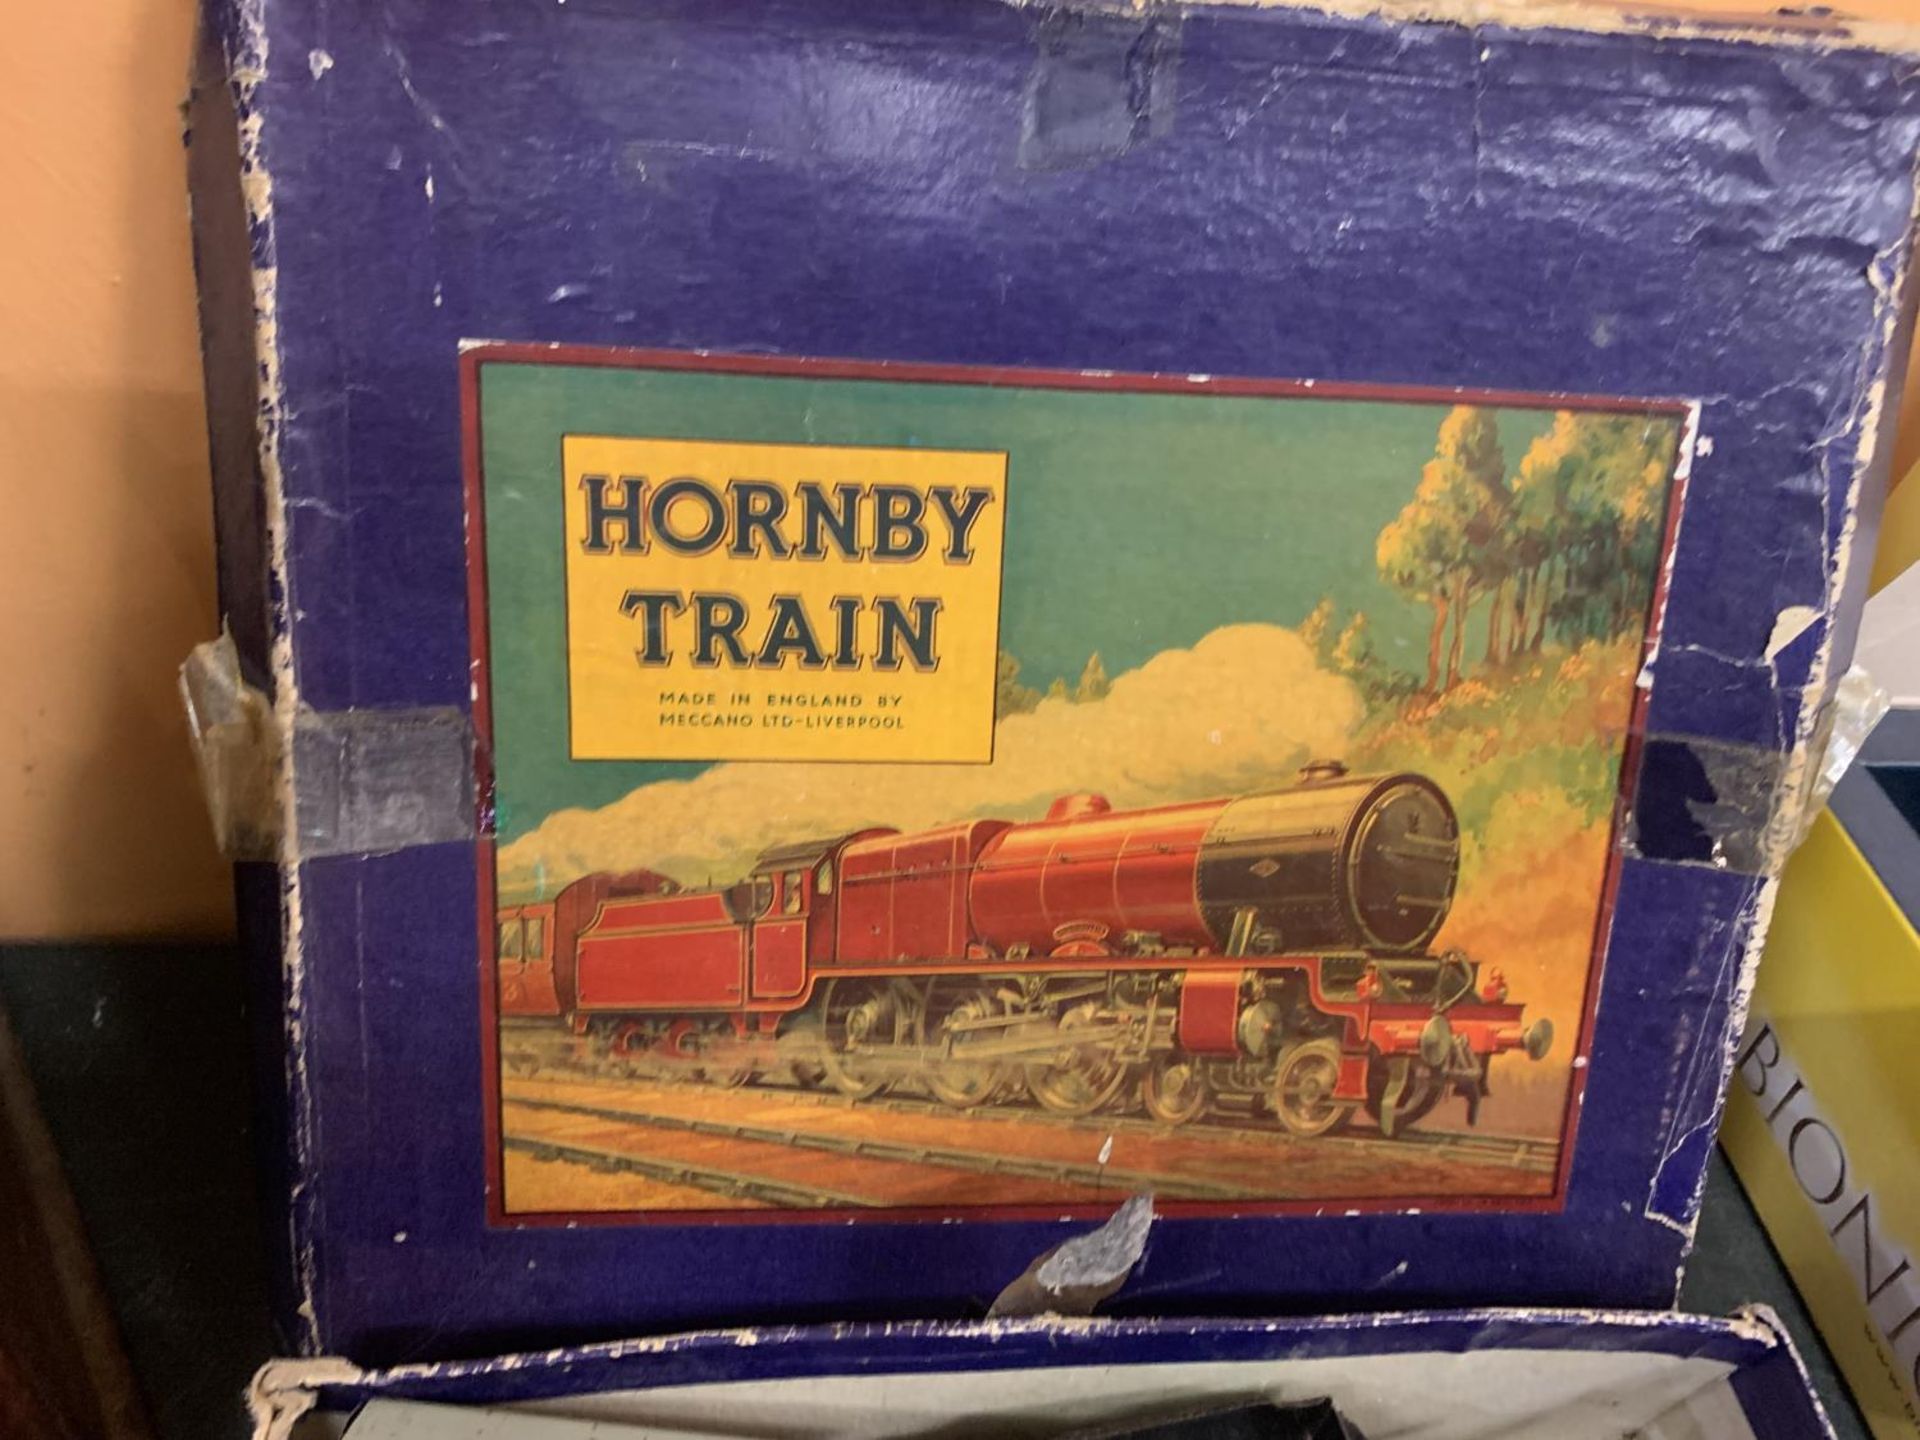 A BOXED VINTAGE HORNBY TRAIN SET TO INCLUDE AN ENGINE WITH TENDER, TWO PULLMAN CARRIAGES AND TRACK - Image 3 of 4